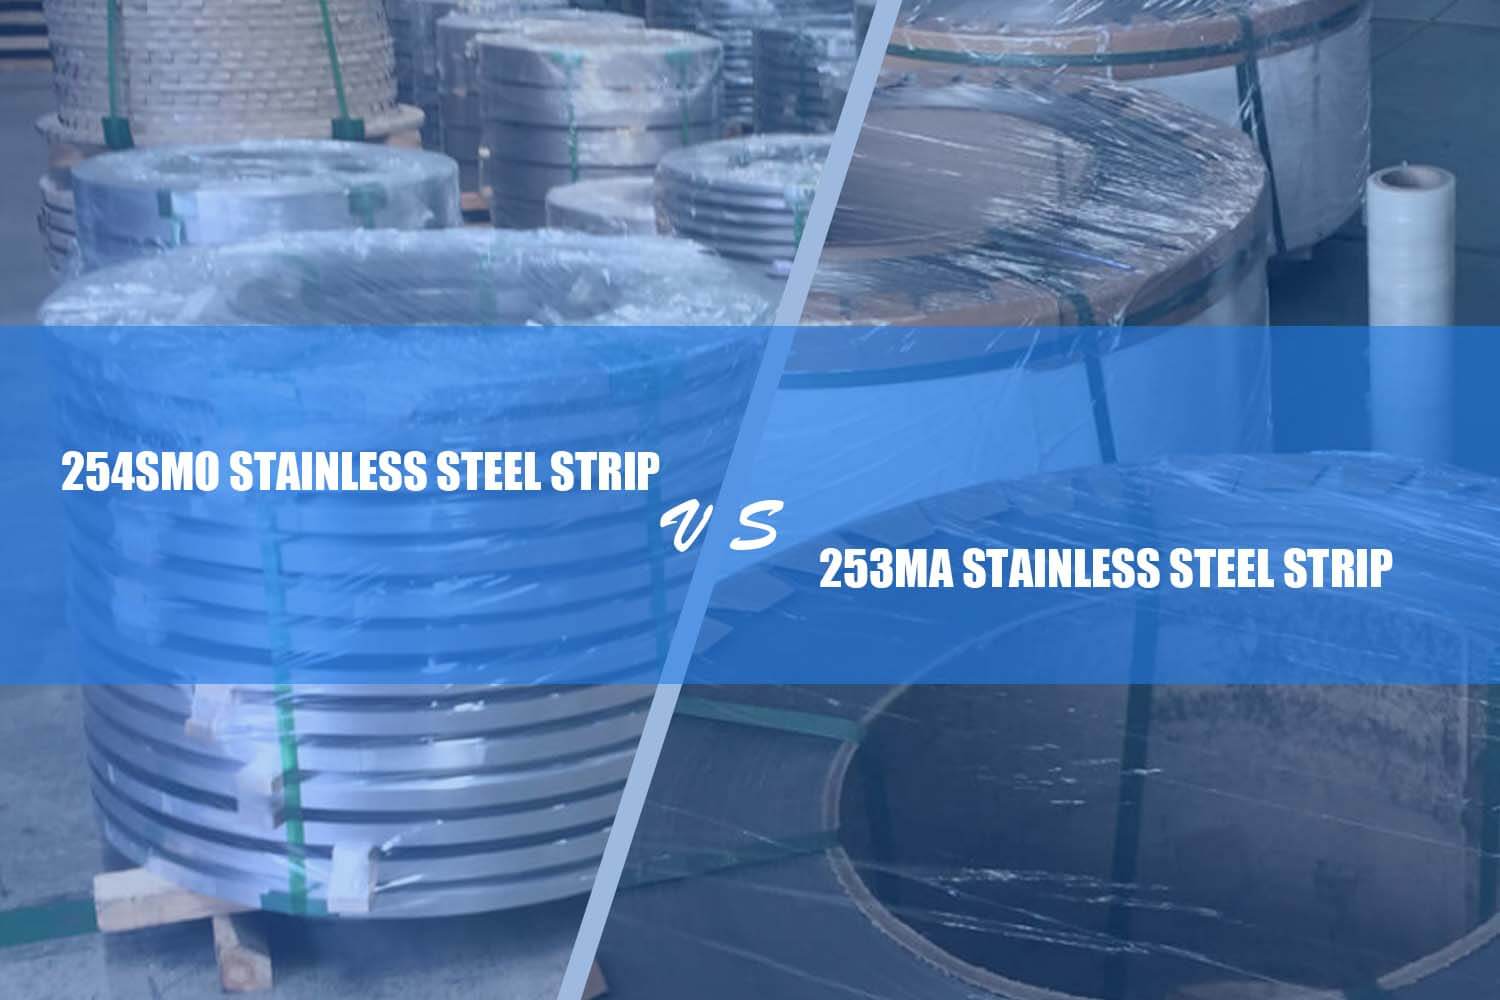 difference between 254smo stainless steel strip and 253ma stainless steel strip